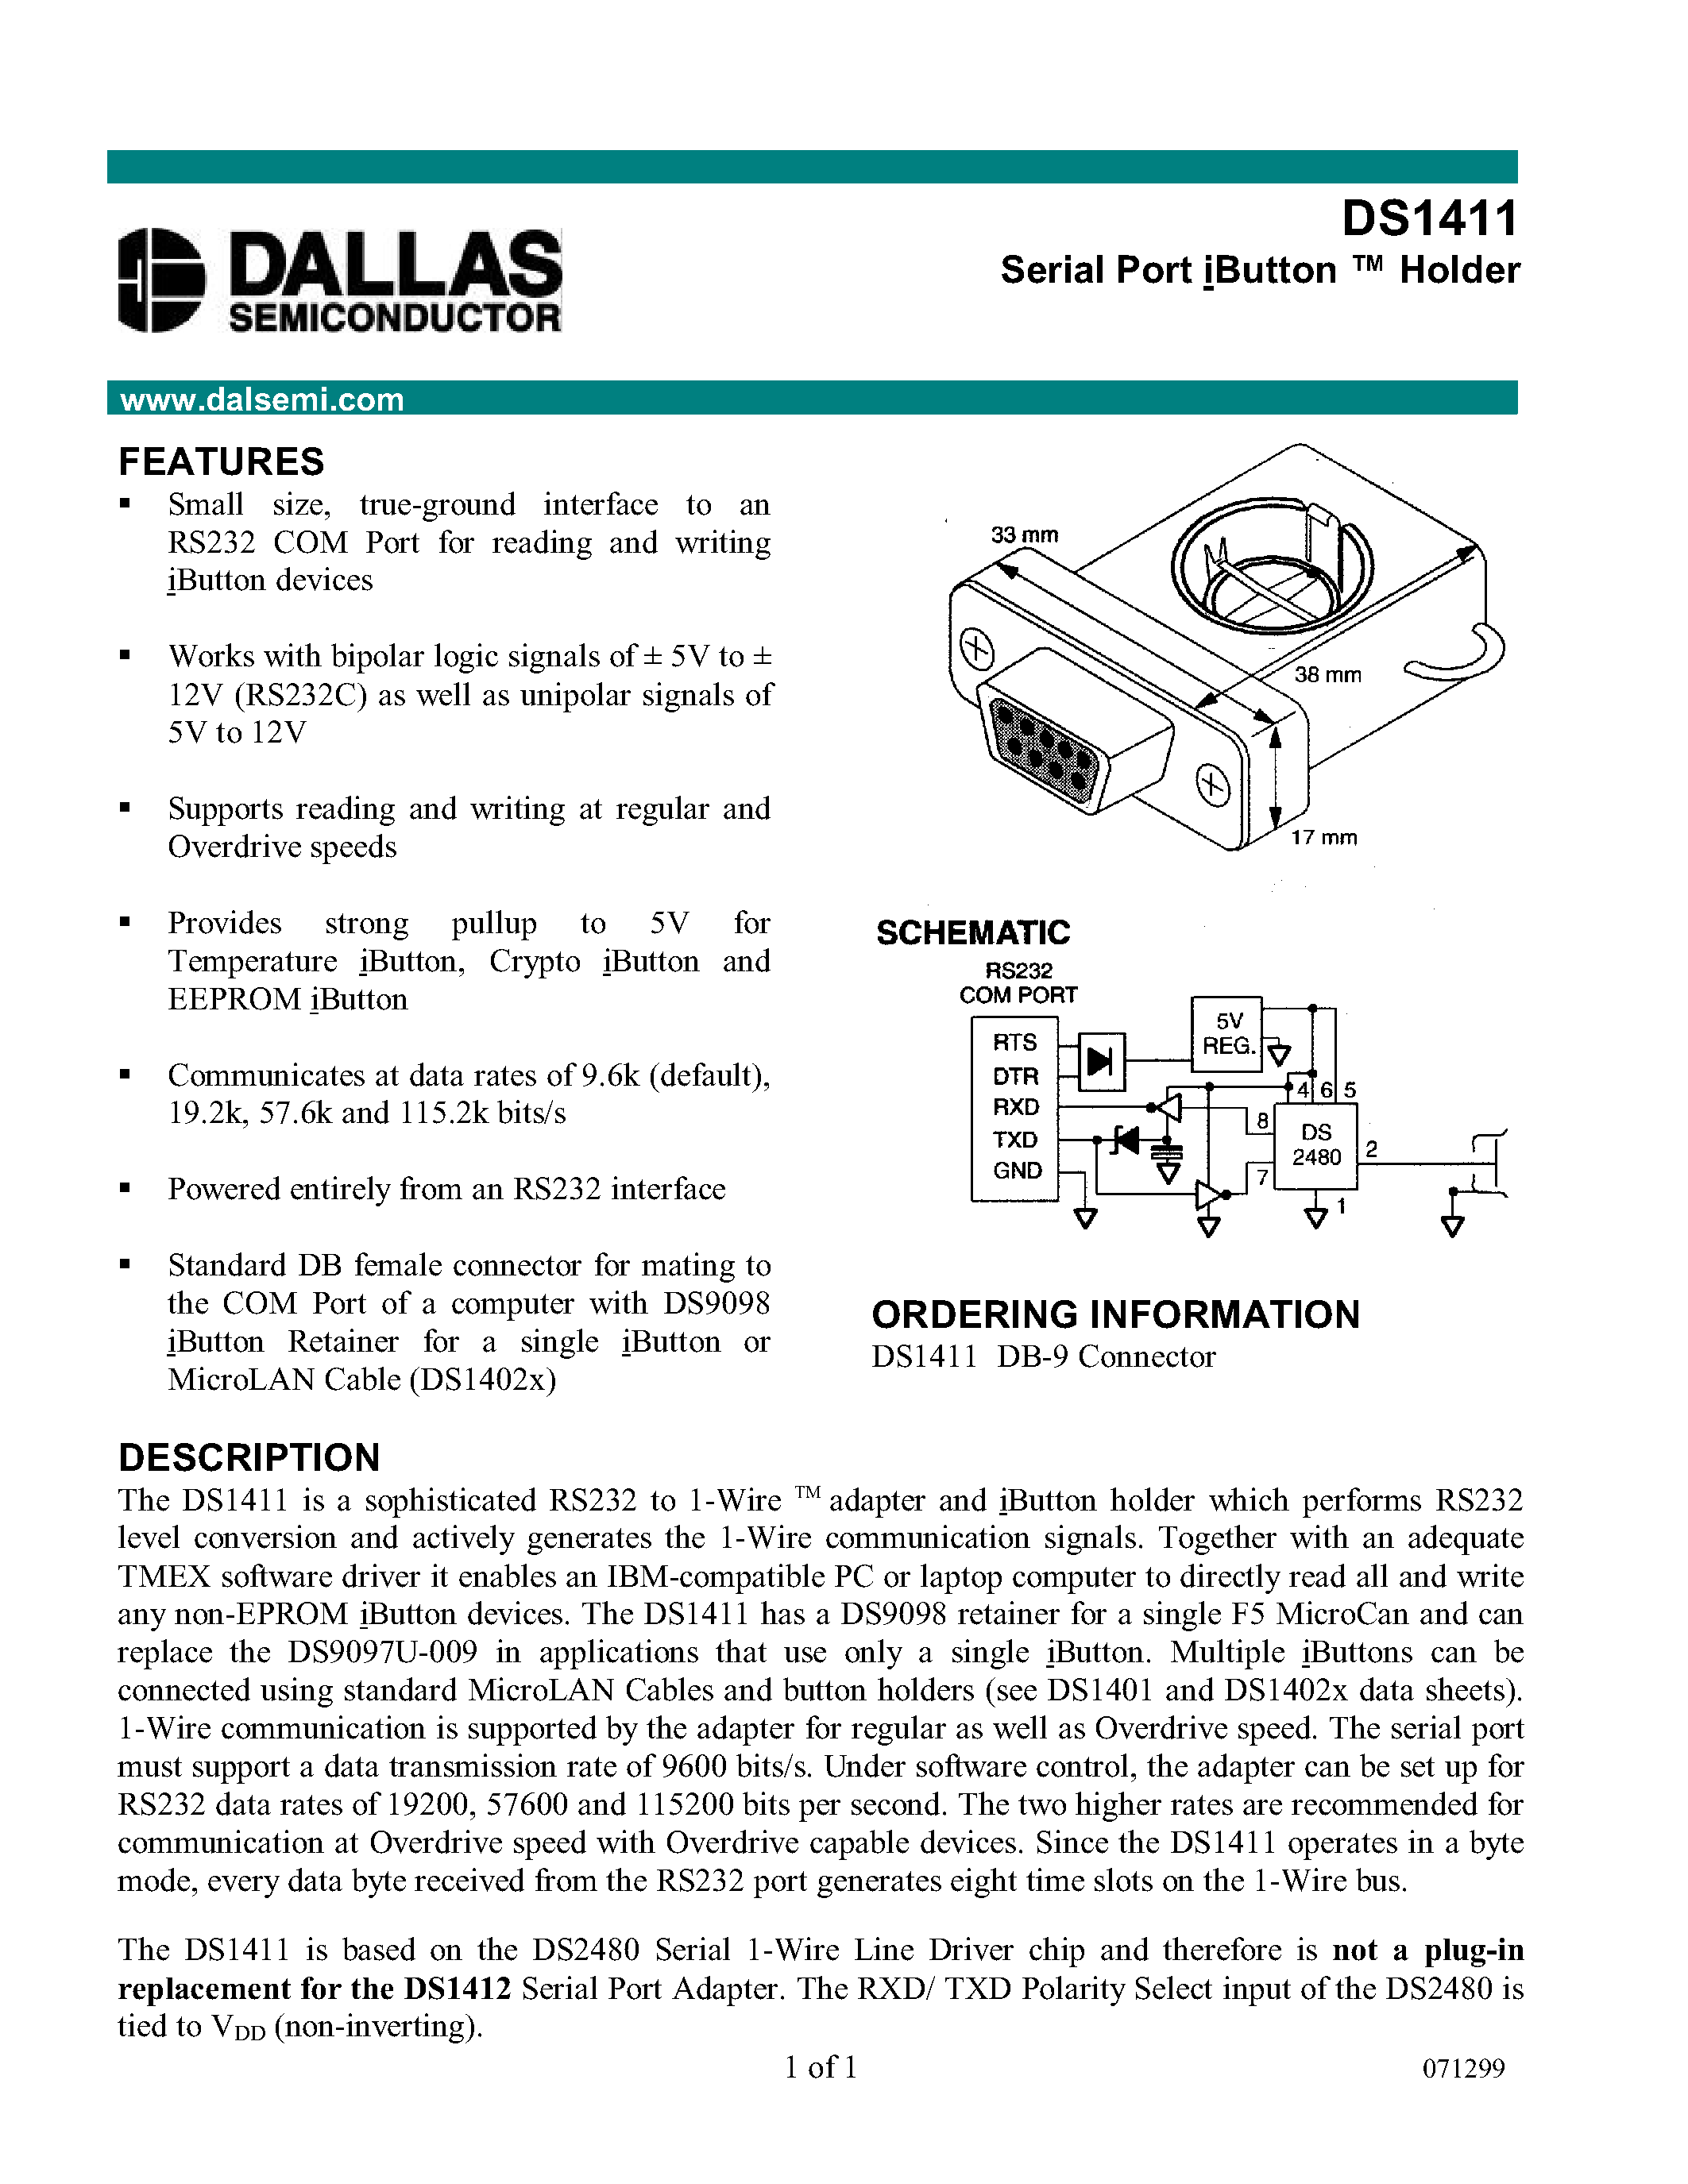 Datasheet DS1411DB-9 - Serial Port iButton Holder page 1